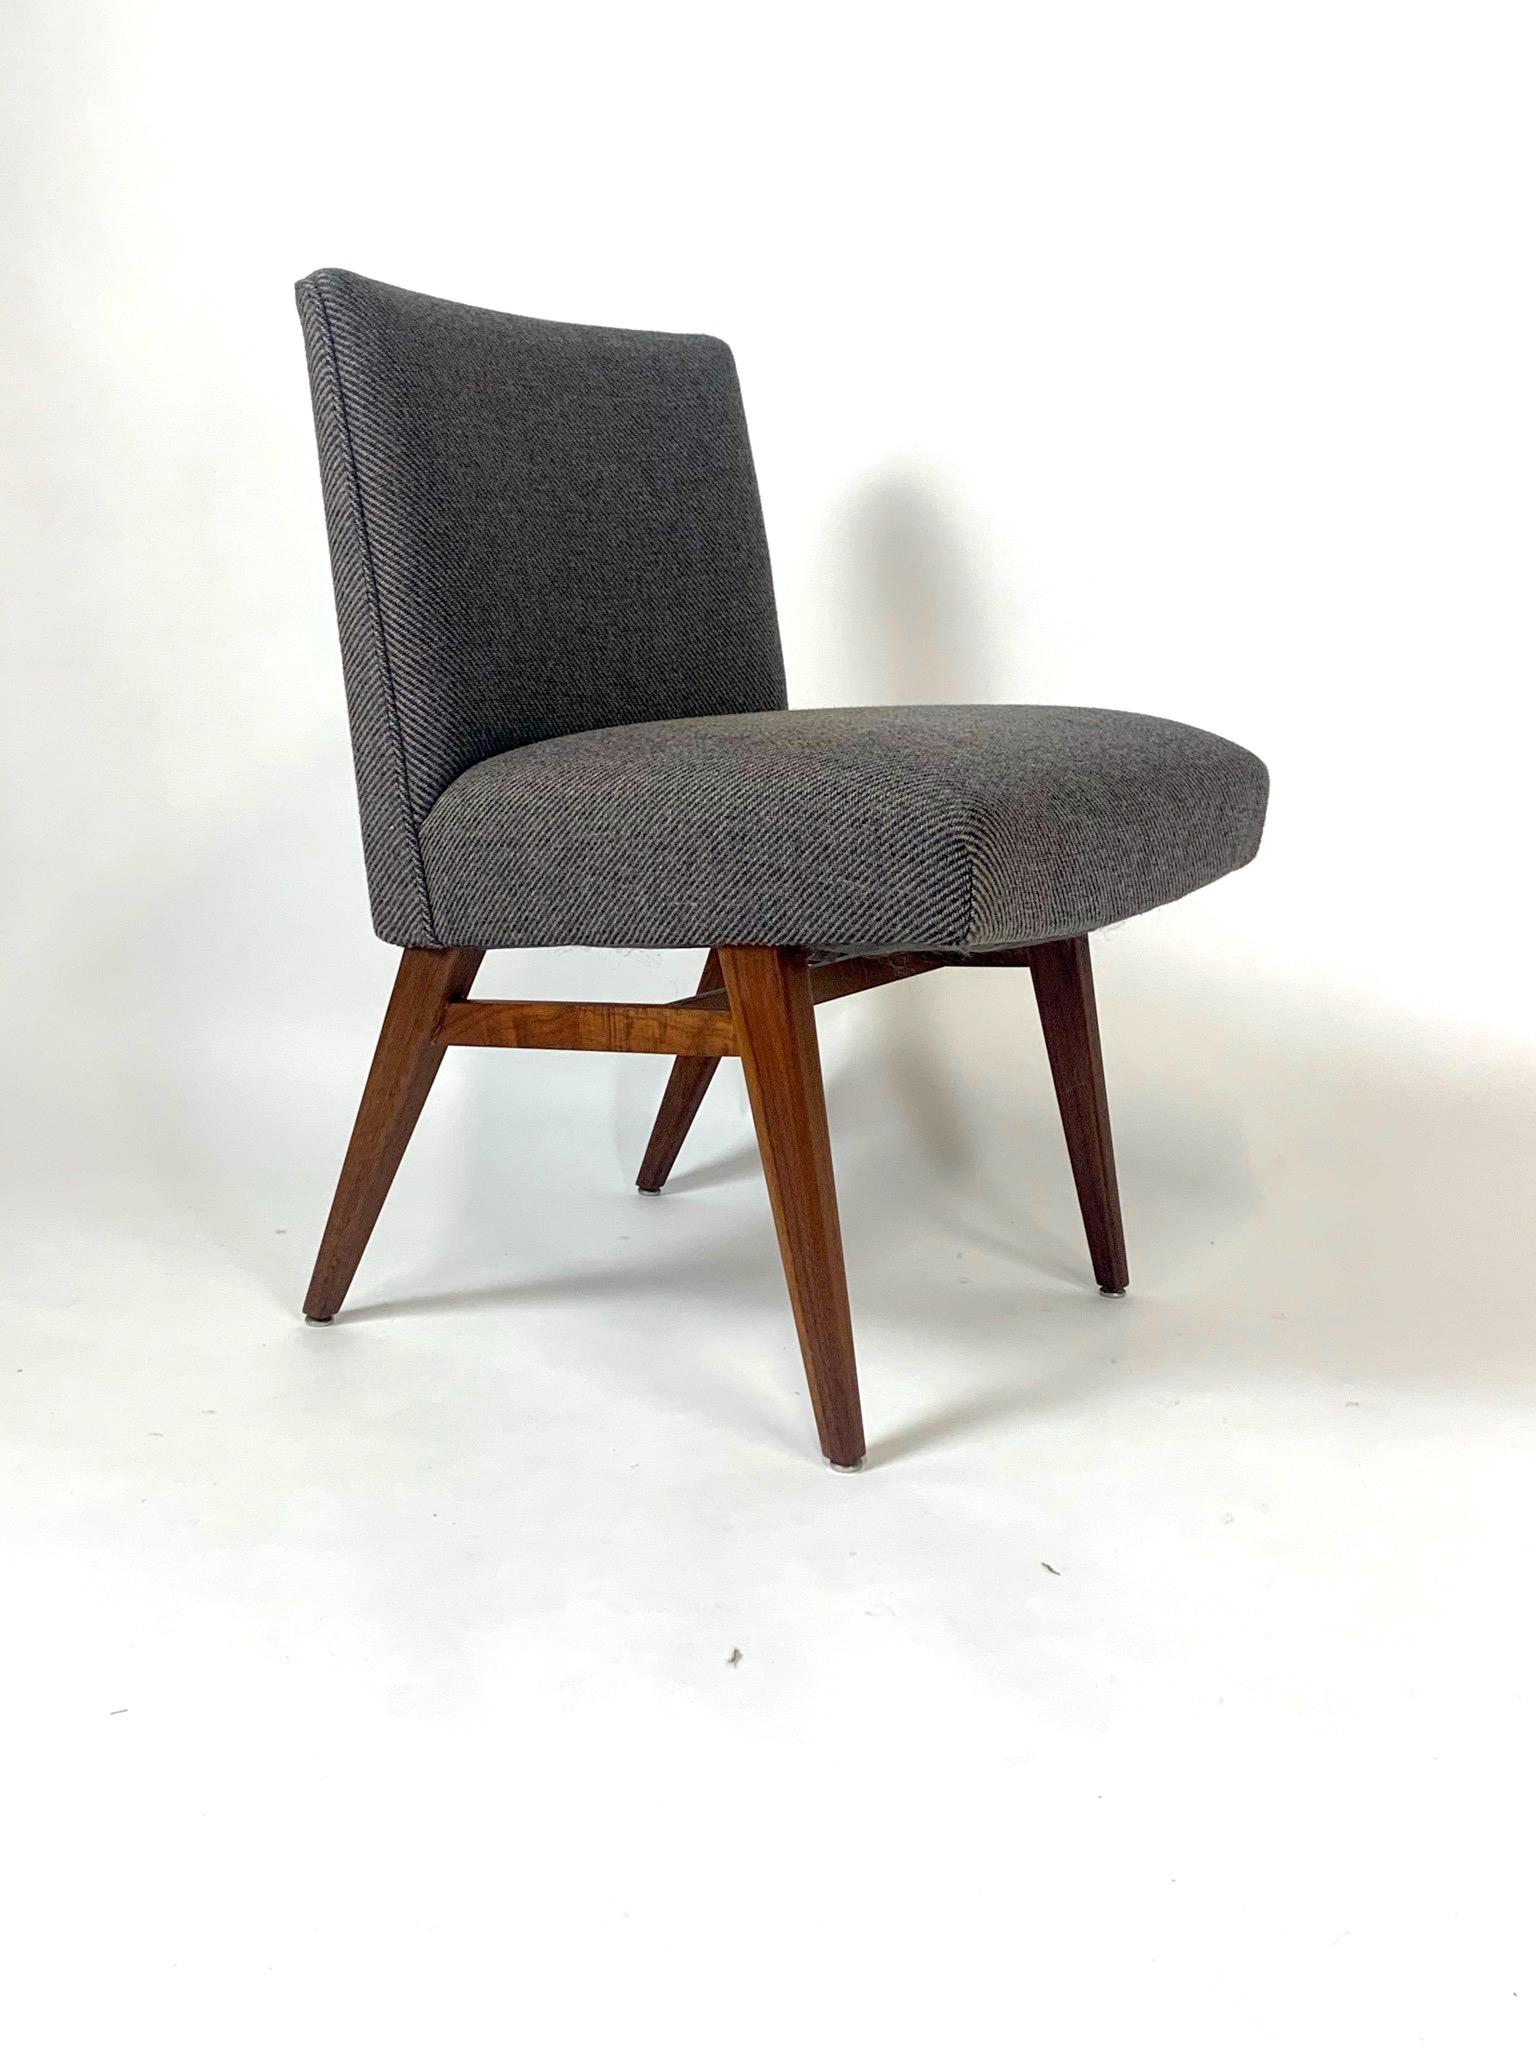 Jens Risom pair of chairs- Model#205. This is a really great unique style in that the height and construction is styled to be either a dining chair, a desk chair, or can be used as occasional lounge or slipper chairs. They are quite comfortable.